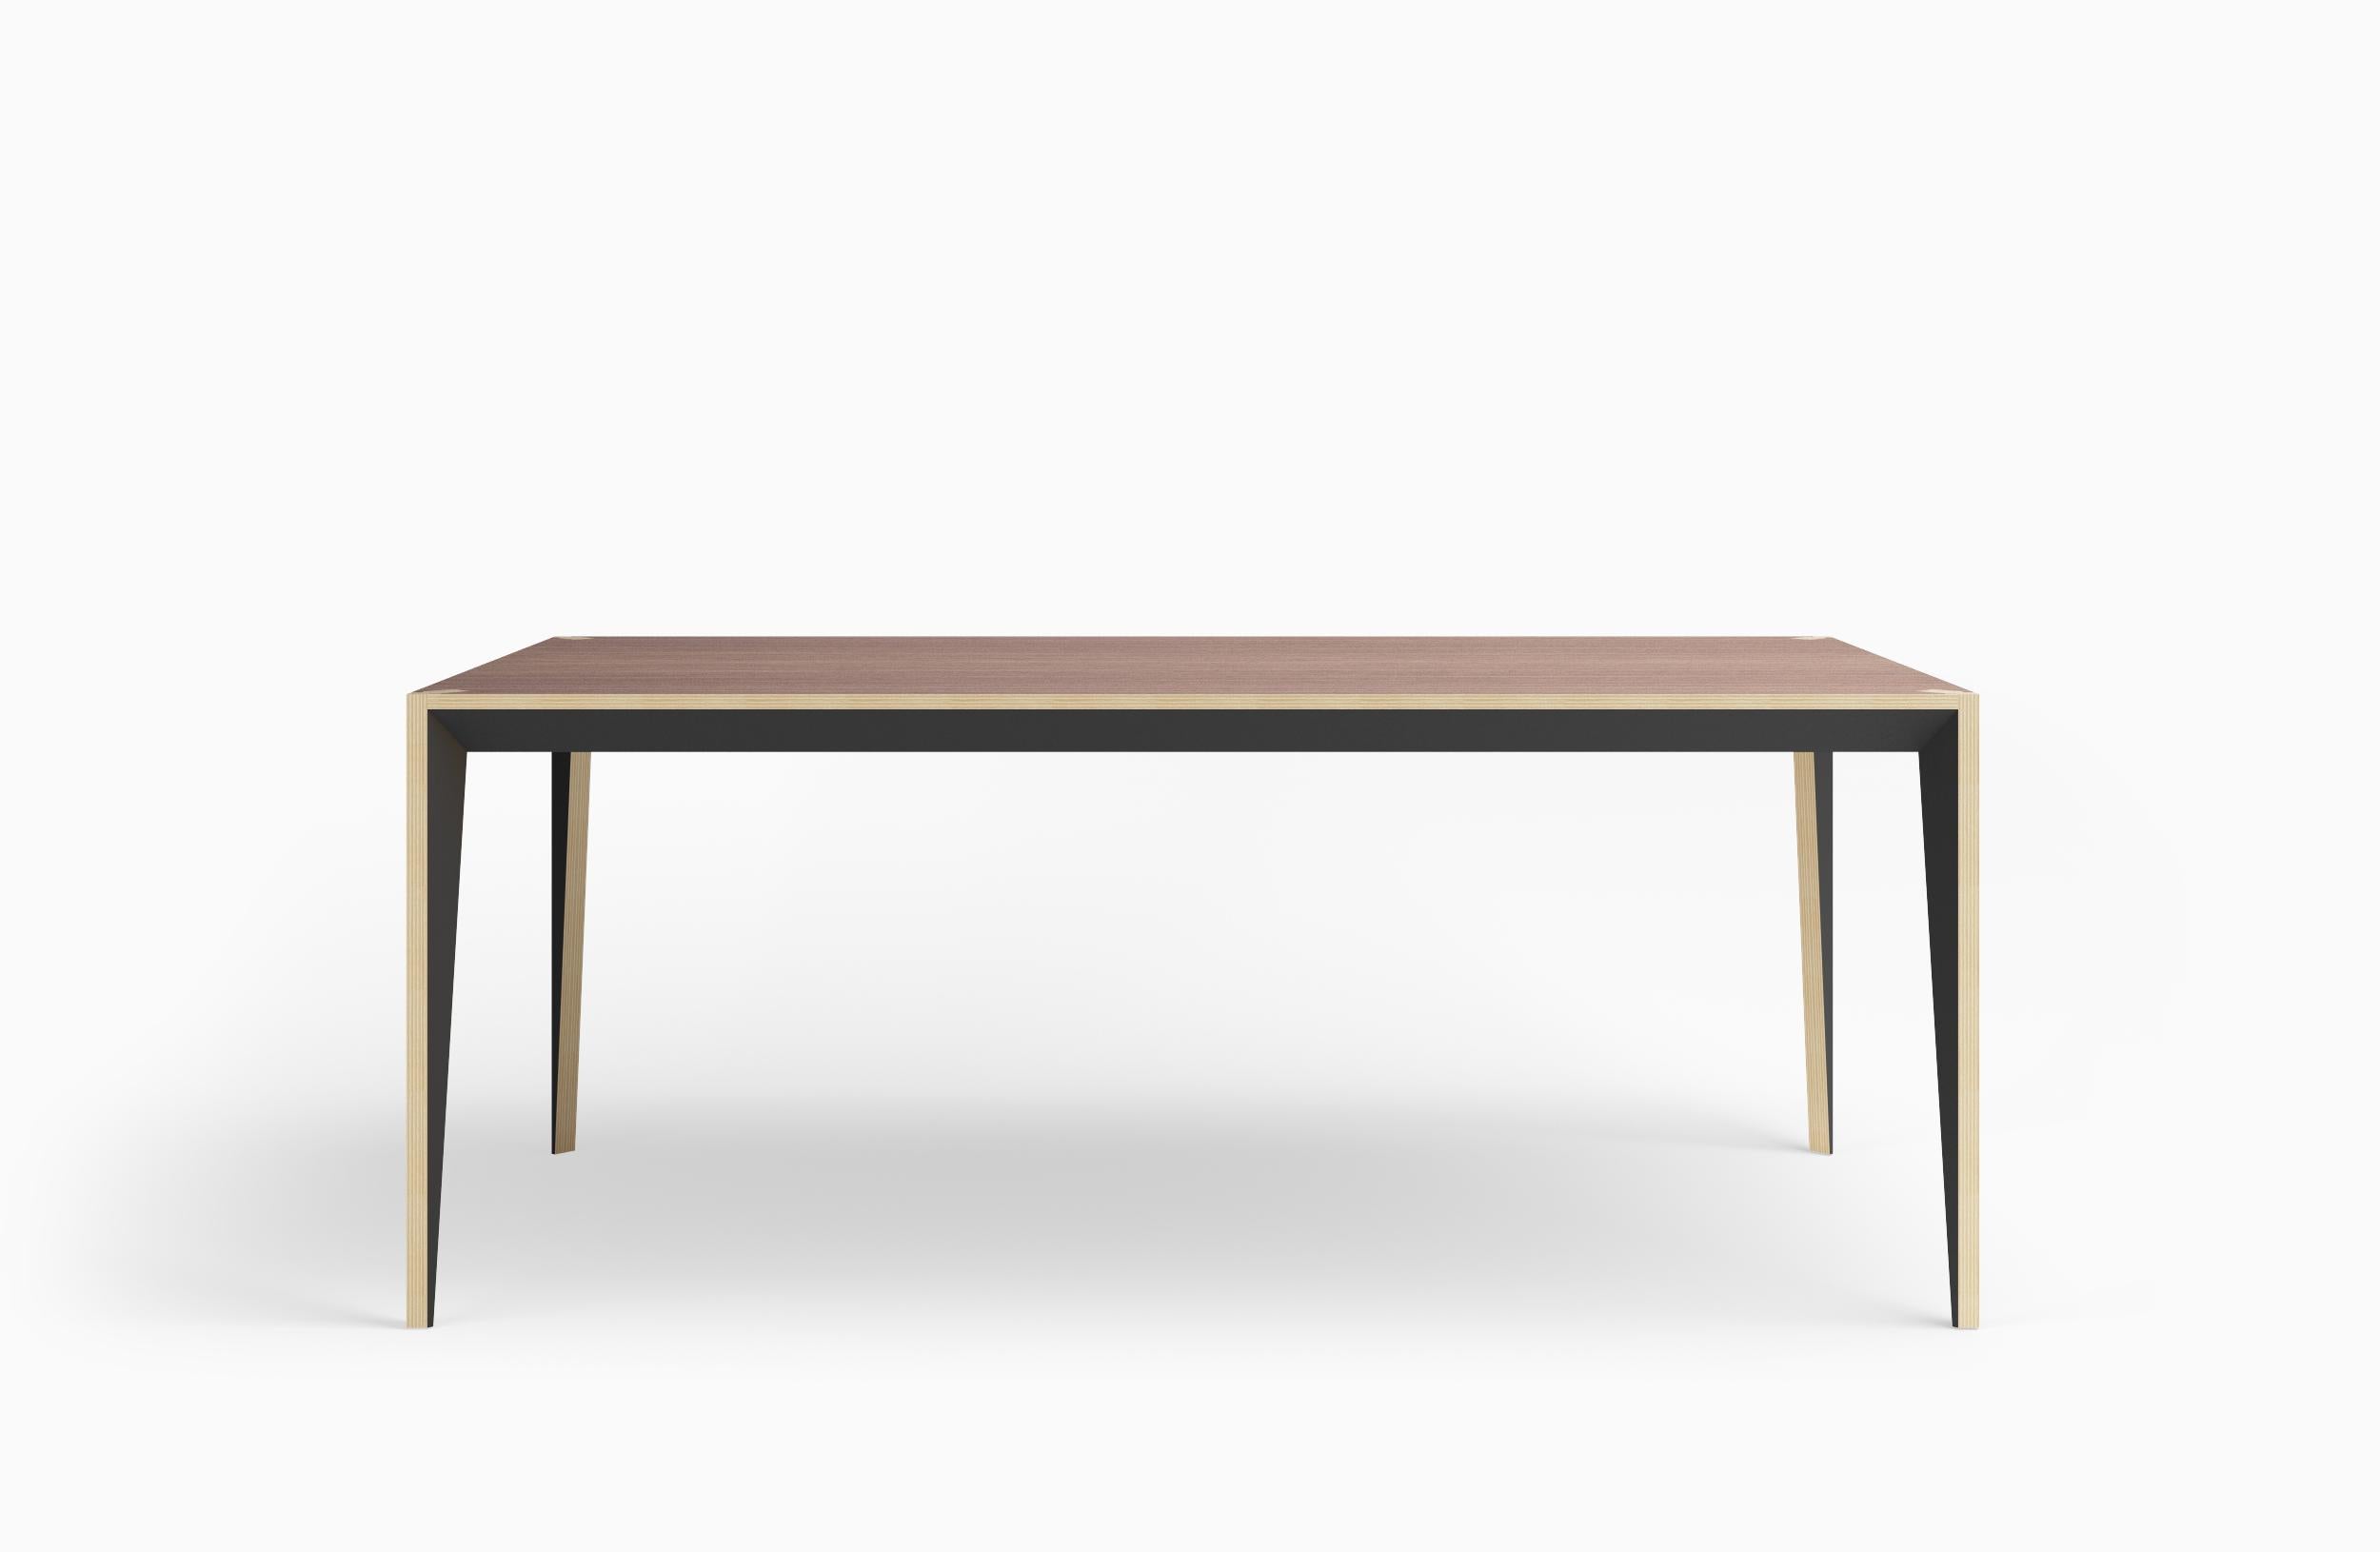 Merging clean lines with warm materials, the faceted geometry of the MiMi dining table creates a slender, elegant profile punctuated with painted surfaces that capture light. This modern and graceful dining table looks great from all angles making